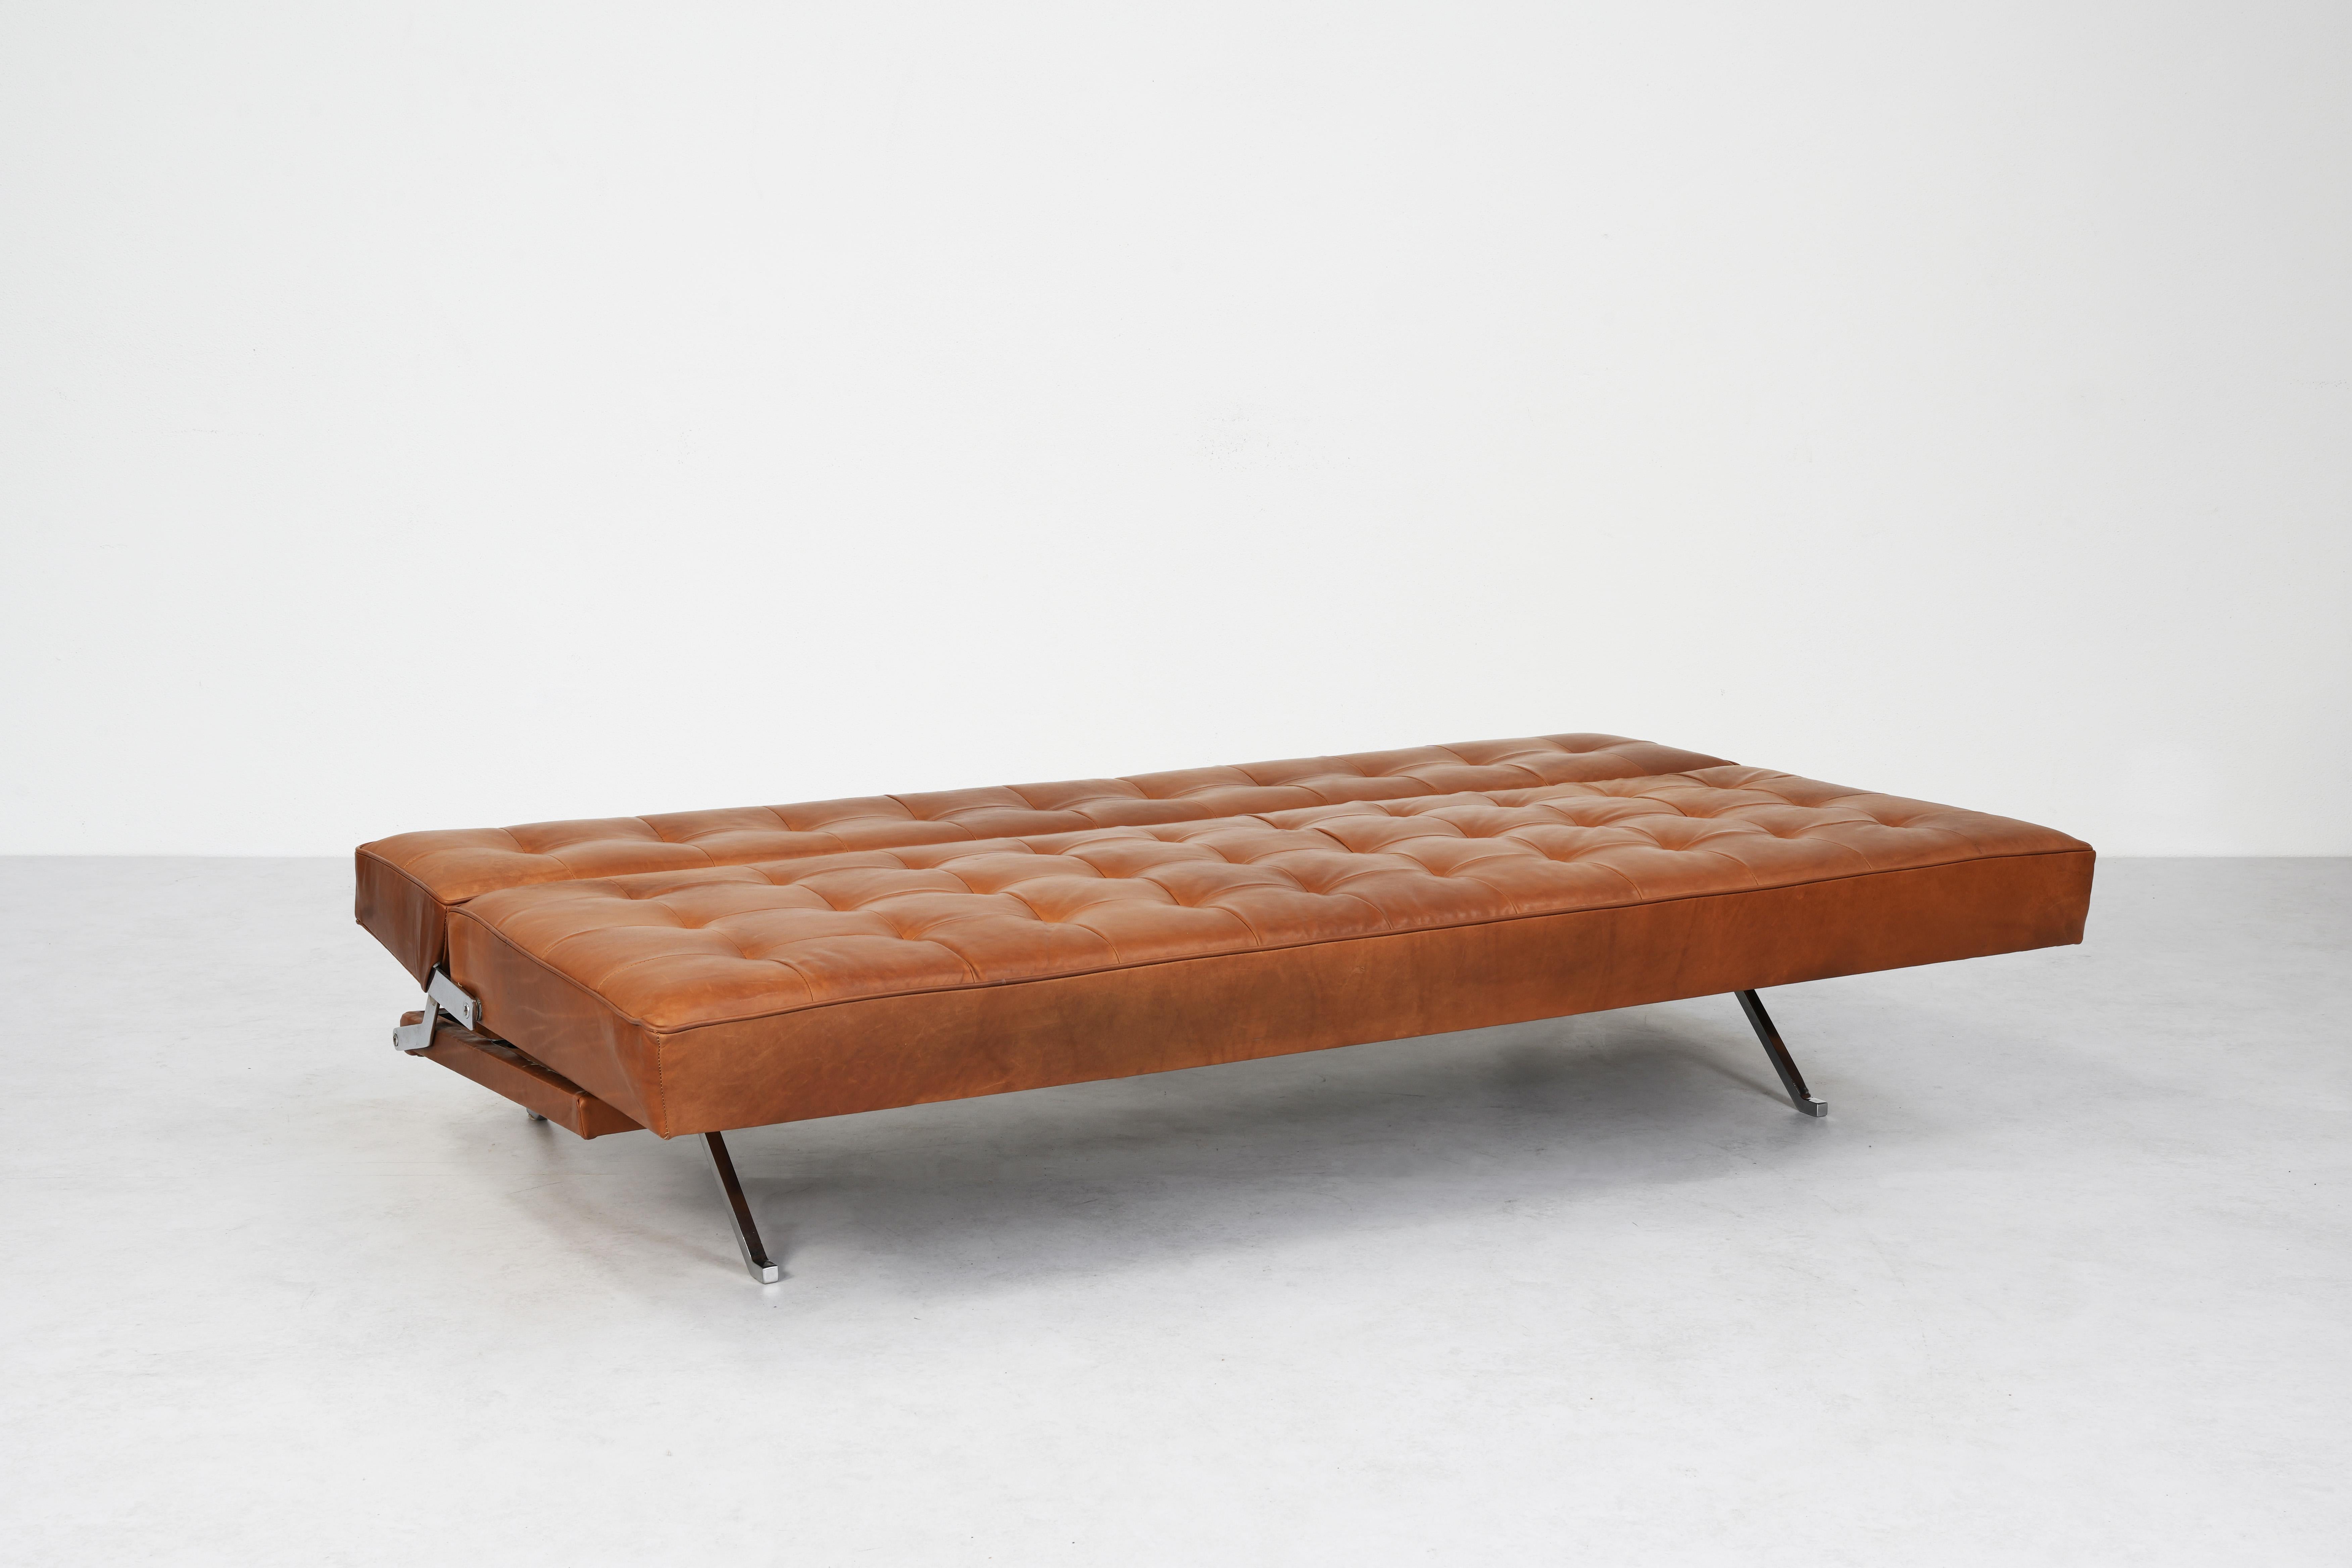 Sofa Daybed Constanze by Johannes Spalt for Wittmann, Austria 1960ies For Sale 5